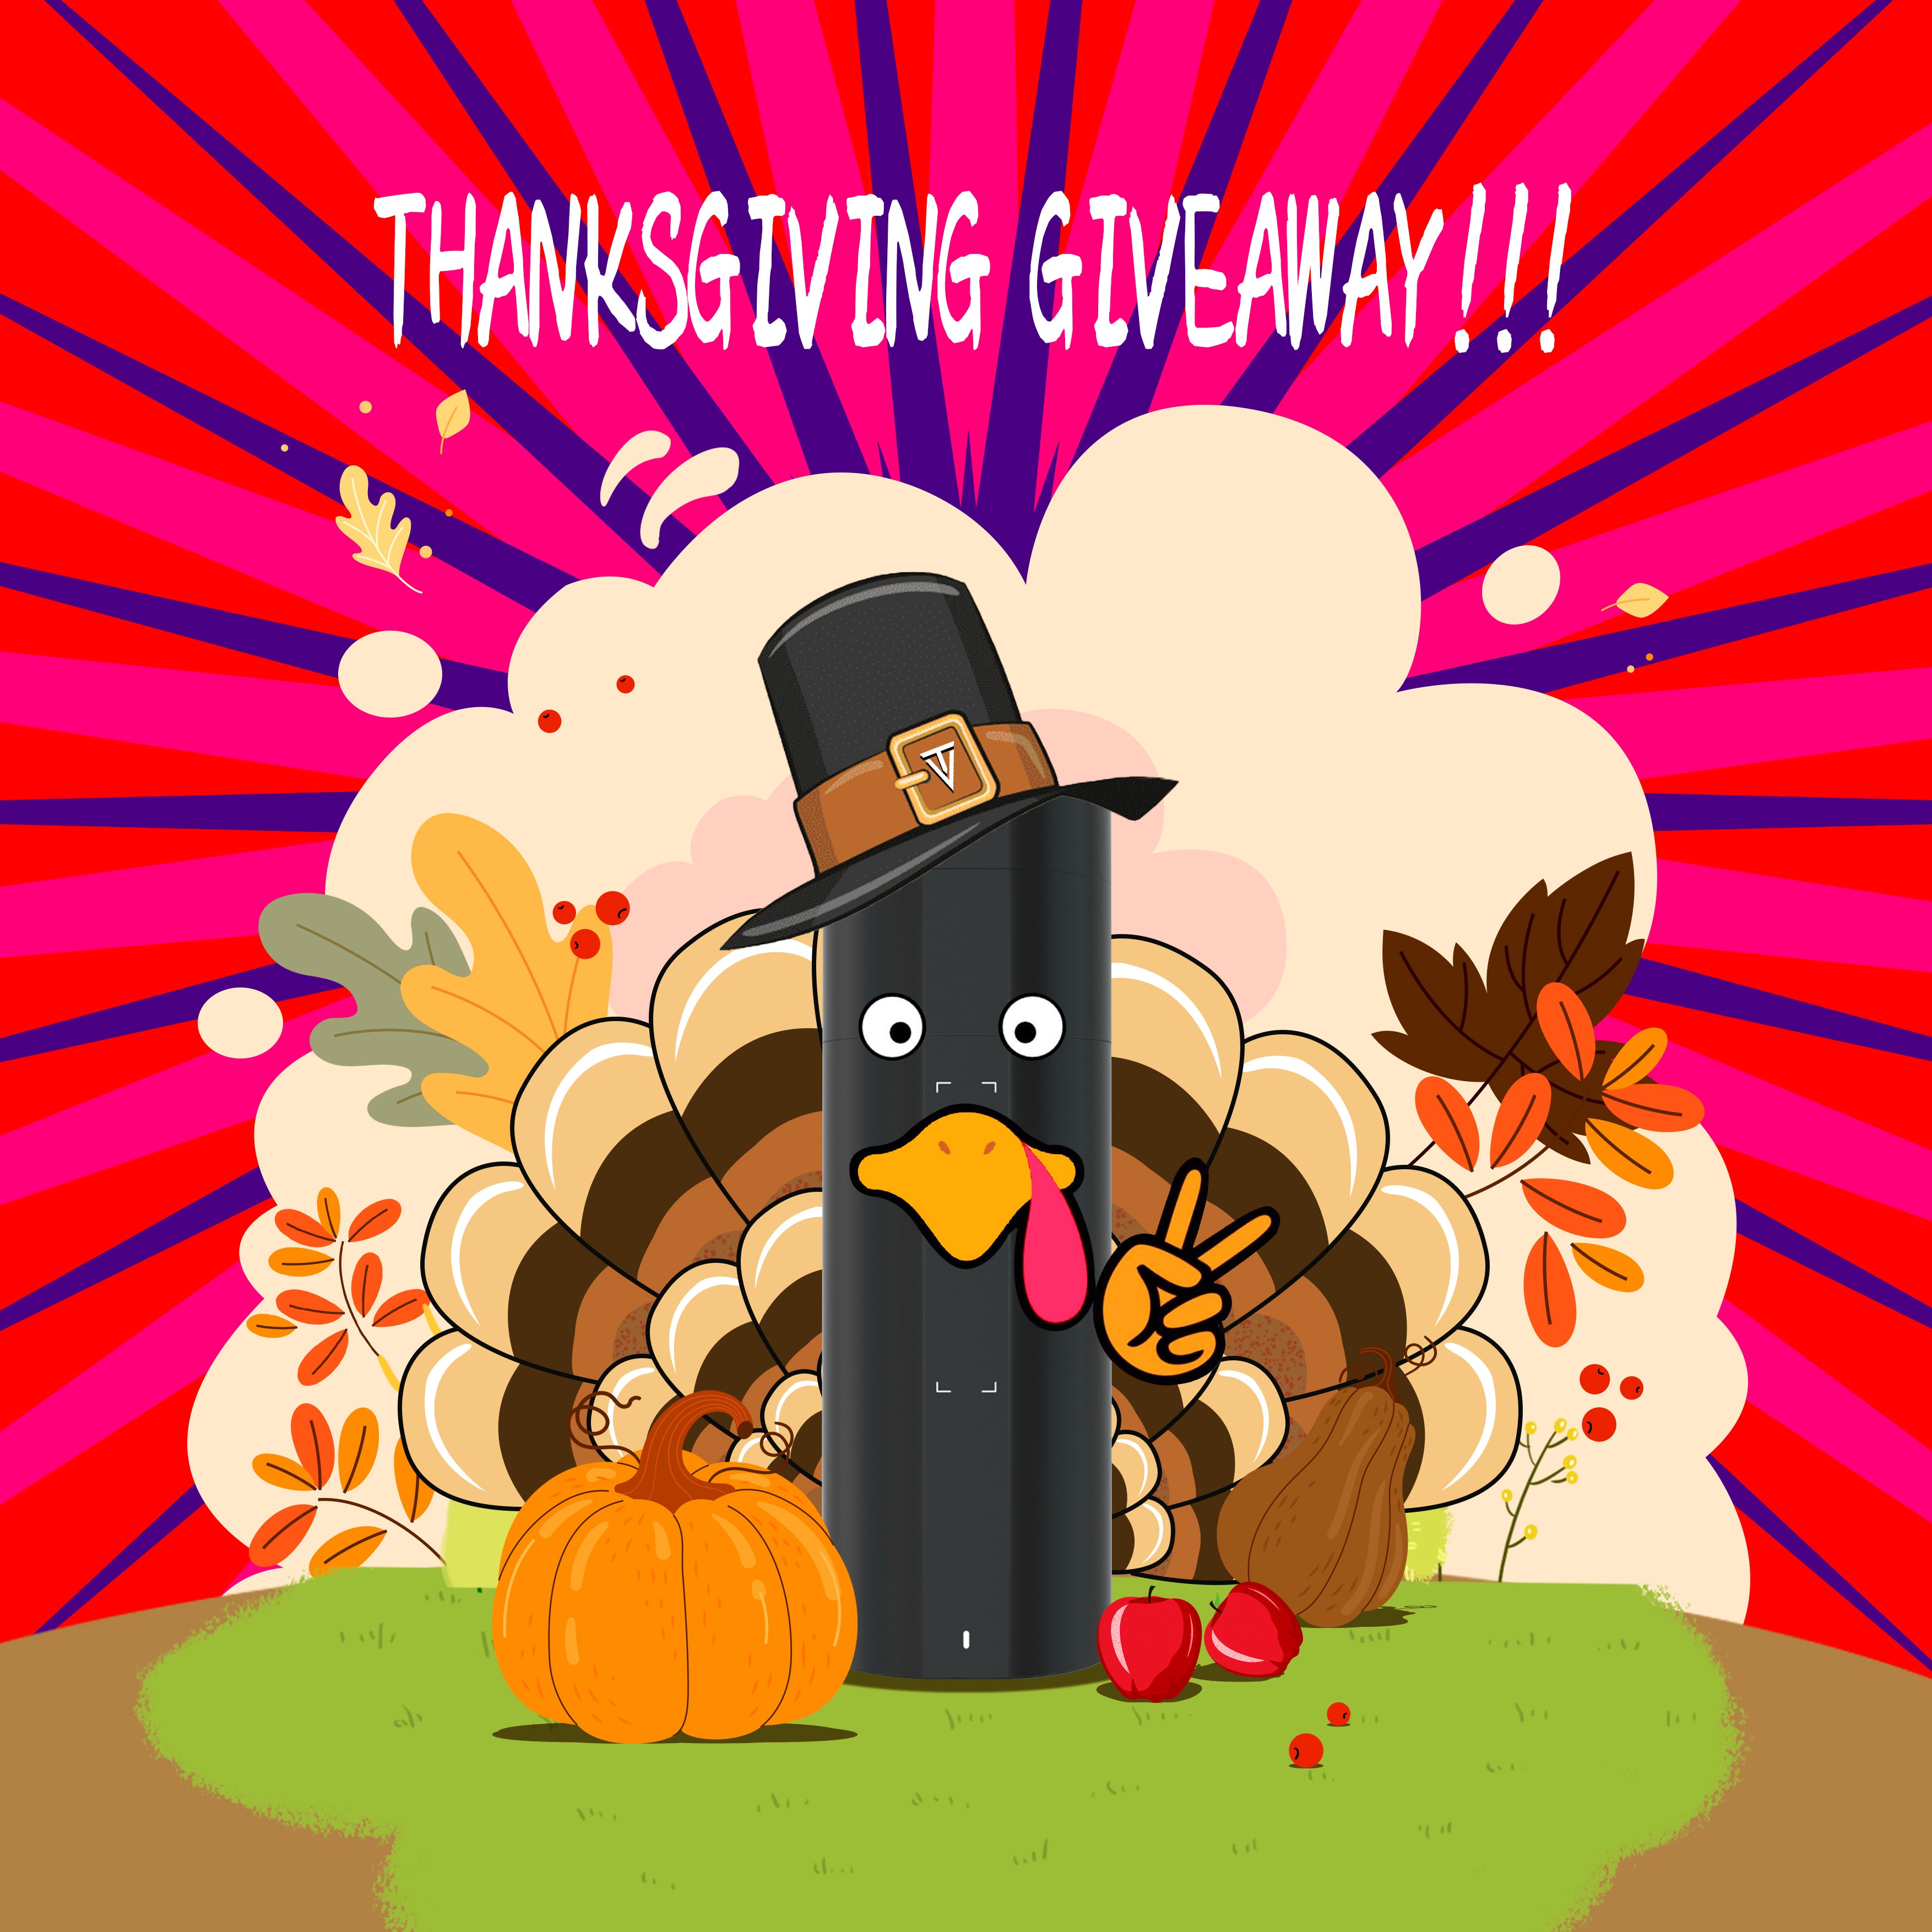 Welcome to Our Thanks Giving Giveaway Activity